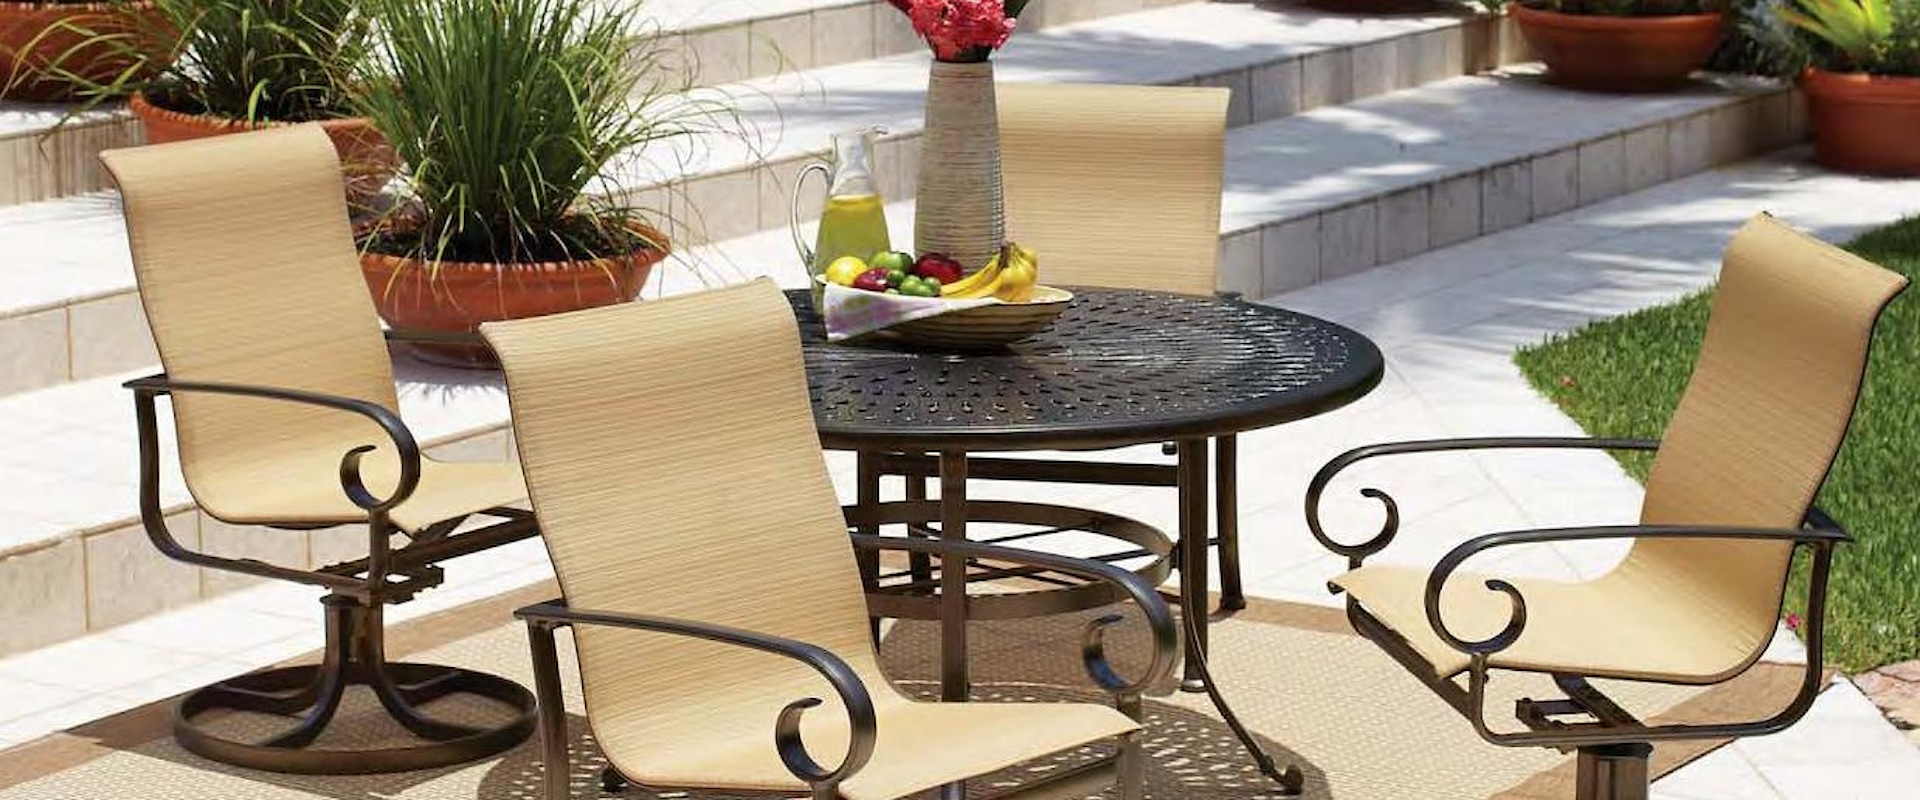 Five Piece Outdoor Dining Set with Cast Iron Table and Sling Chairs